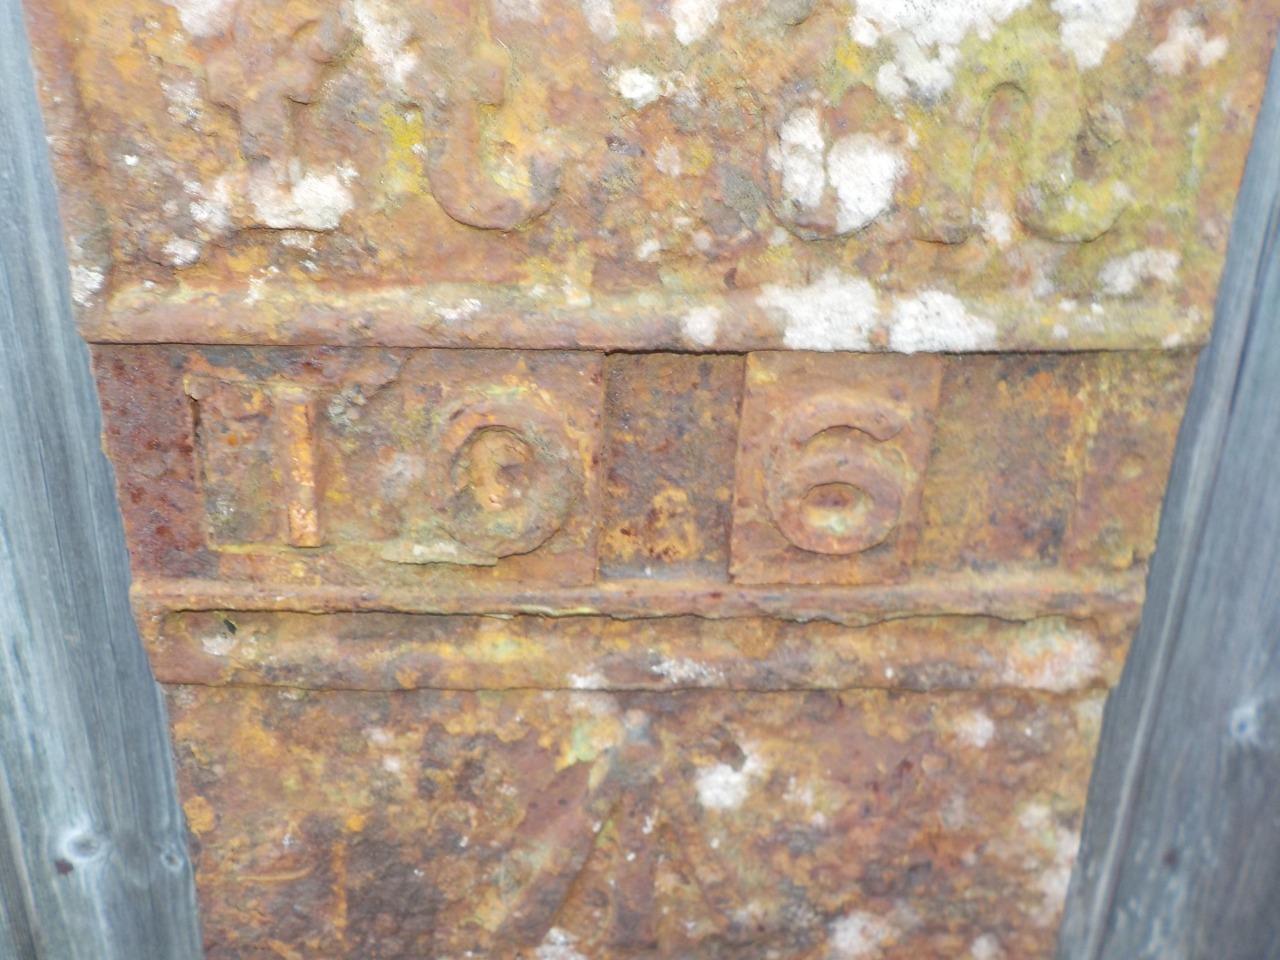 Telegraph cable marker post at Unknown - was for sale on eBay by ebay 